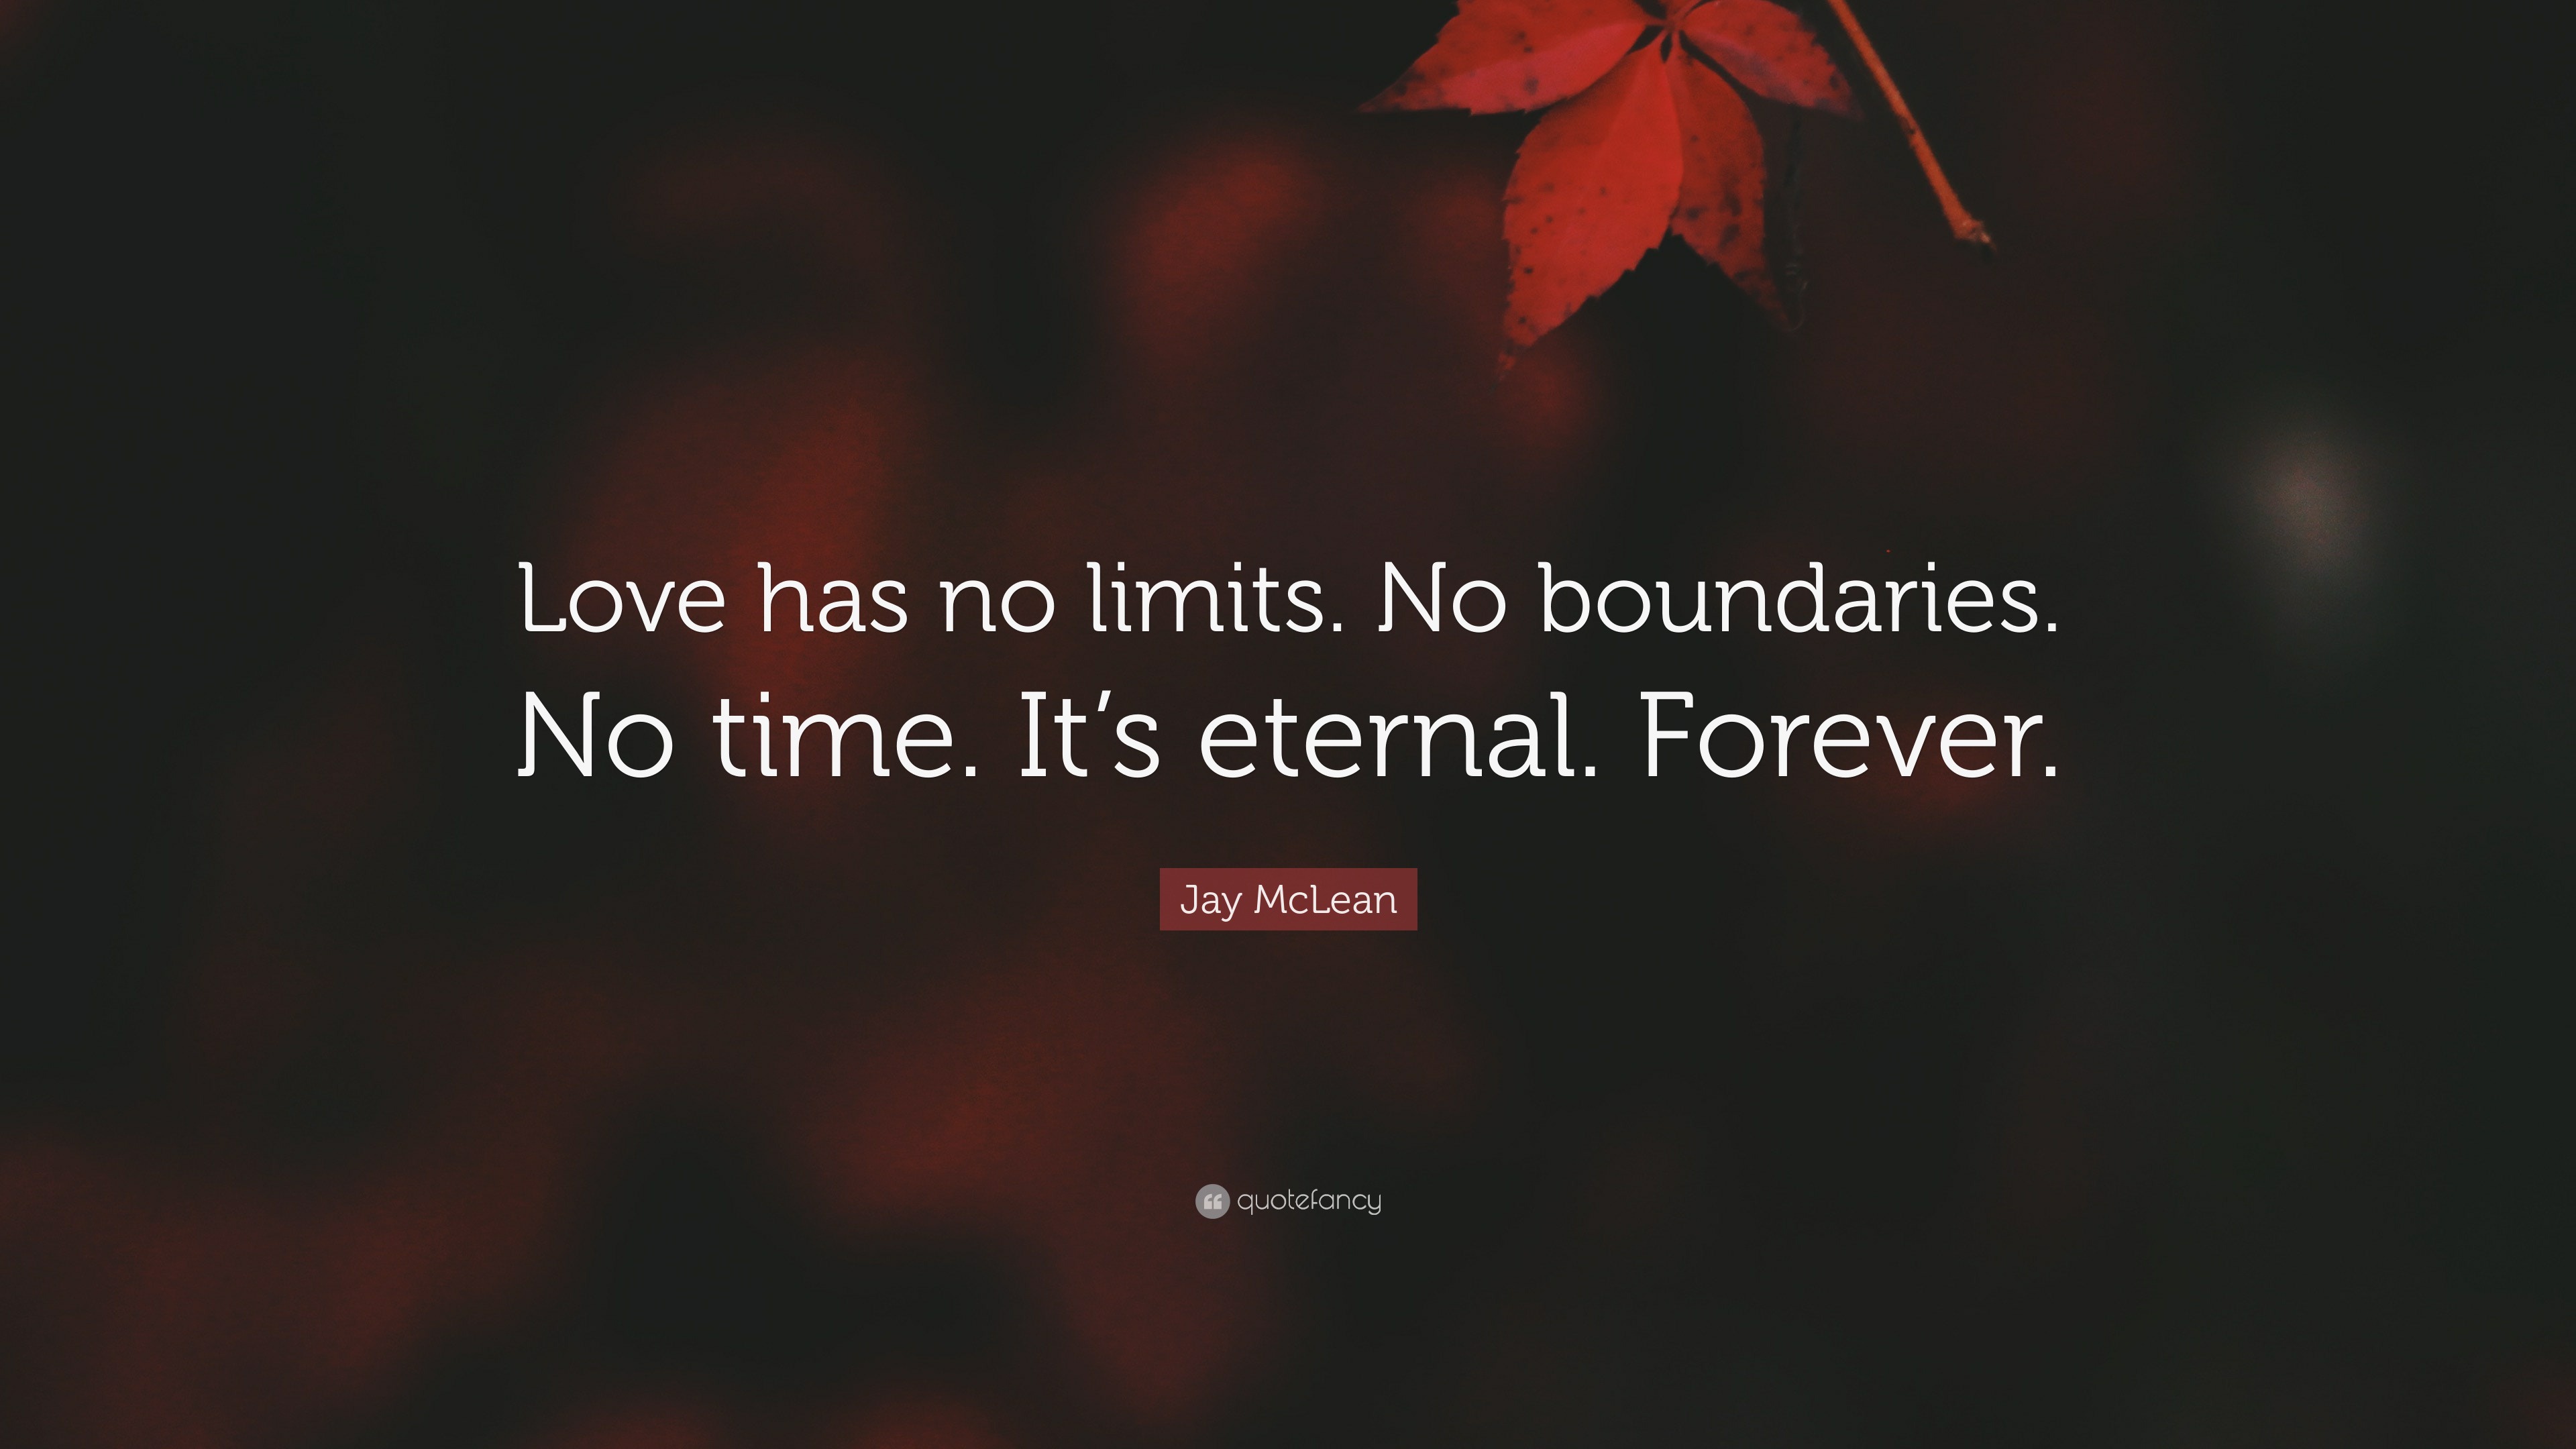 Jay McLean Quote: “Love has no limits. No boundaries. No time. It's  eternal. Forever.”